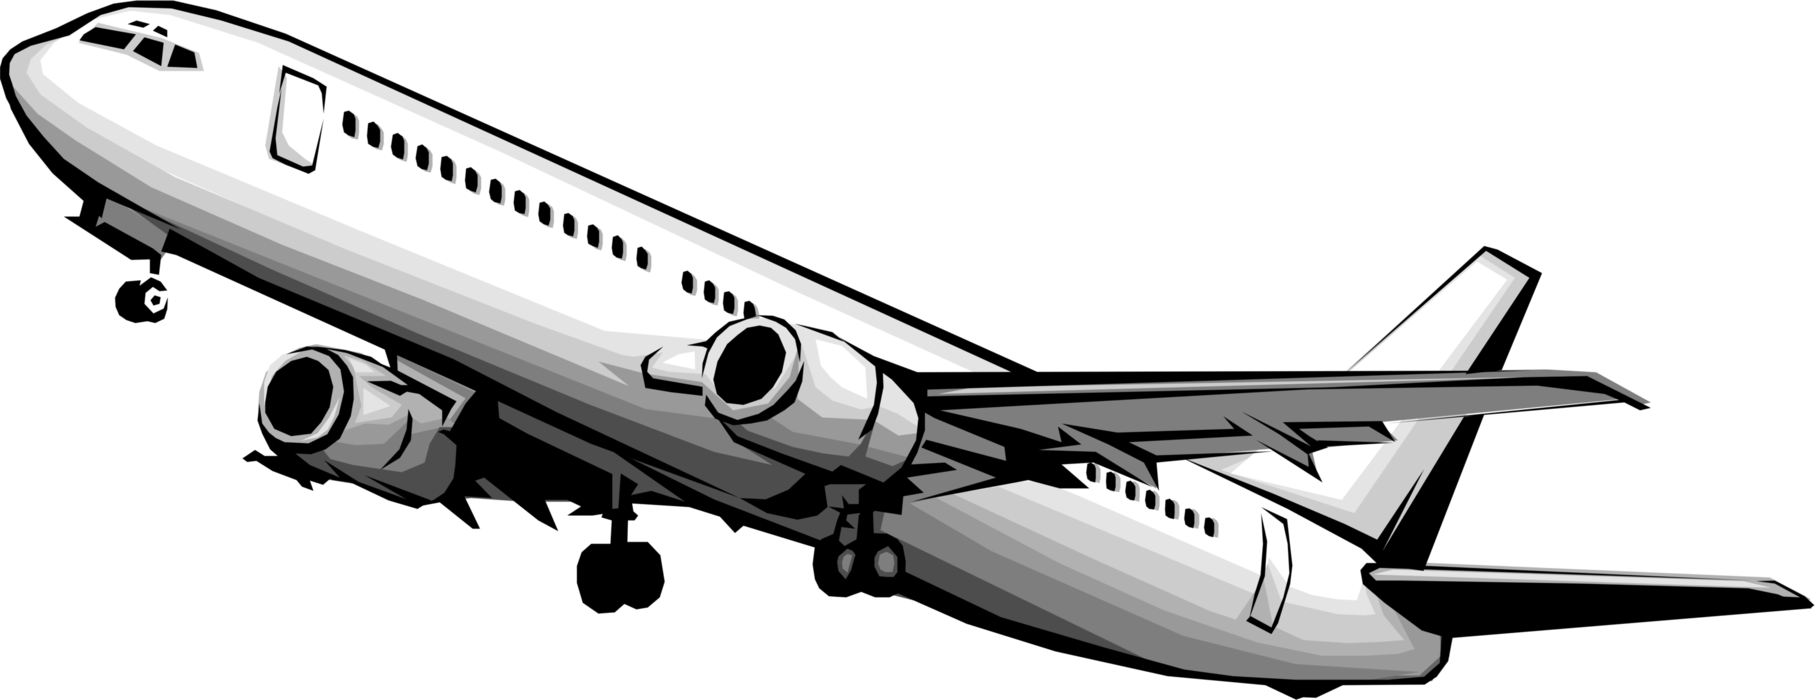 Vector Illustration of Airbus Commercial Passenger Jet Aircraft Takes Off